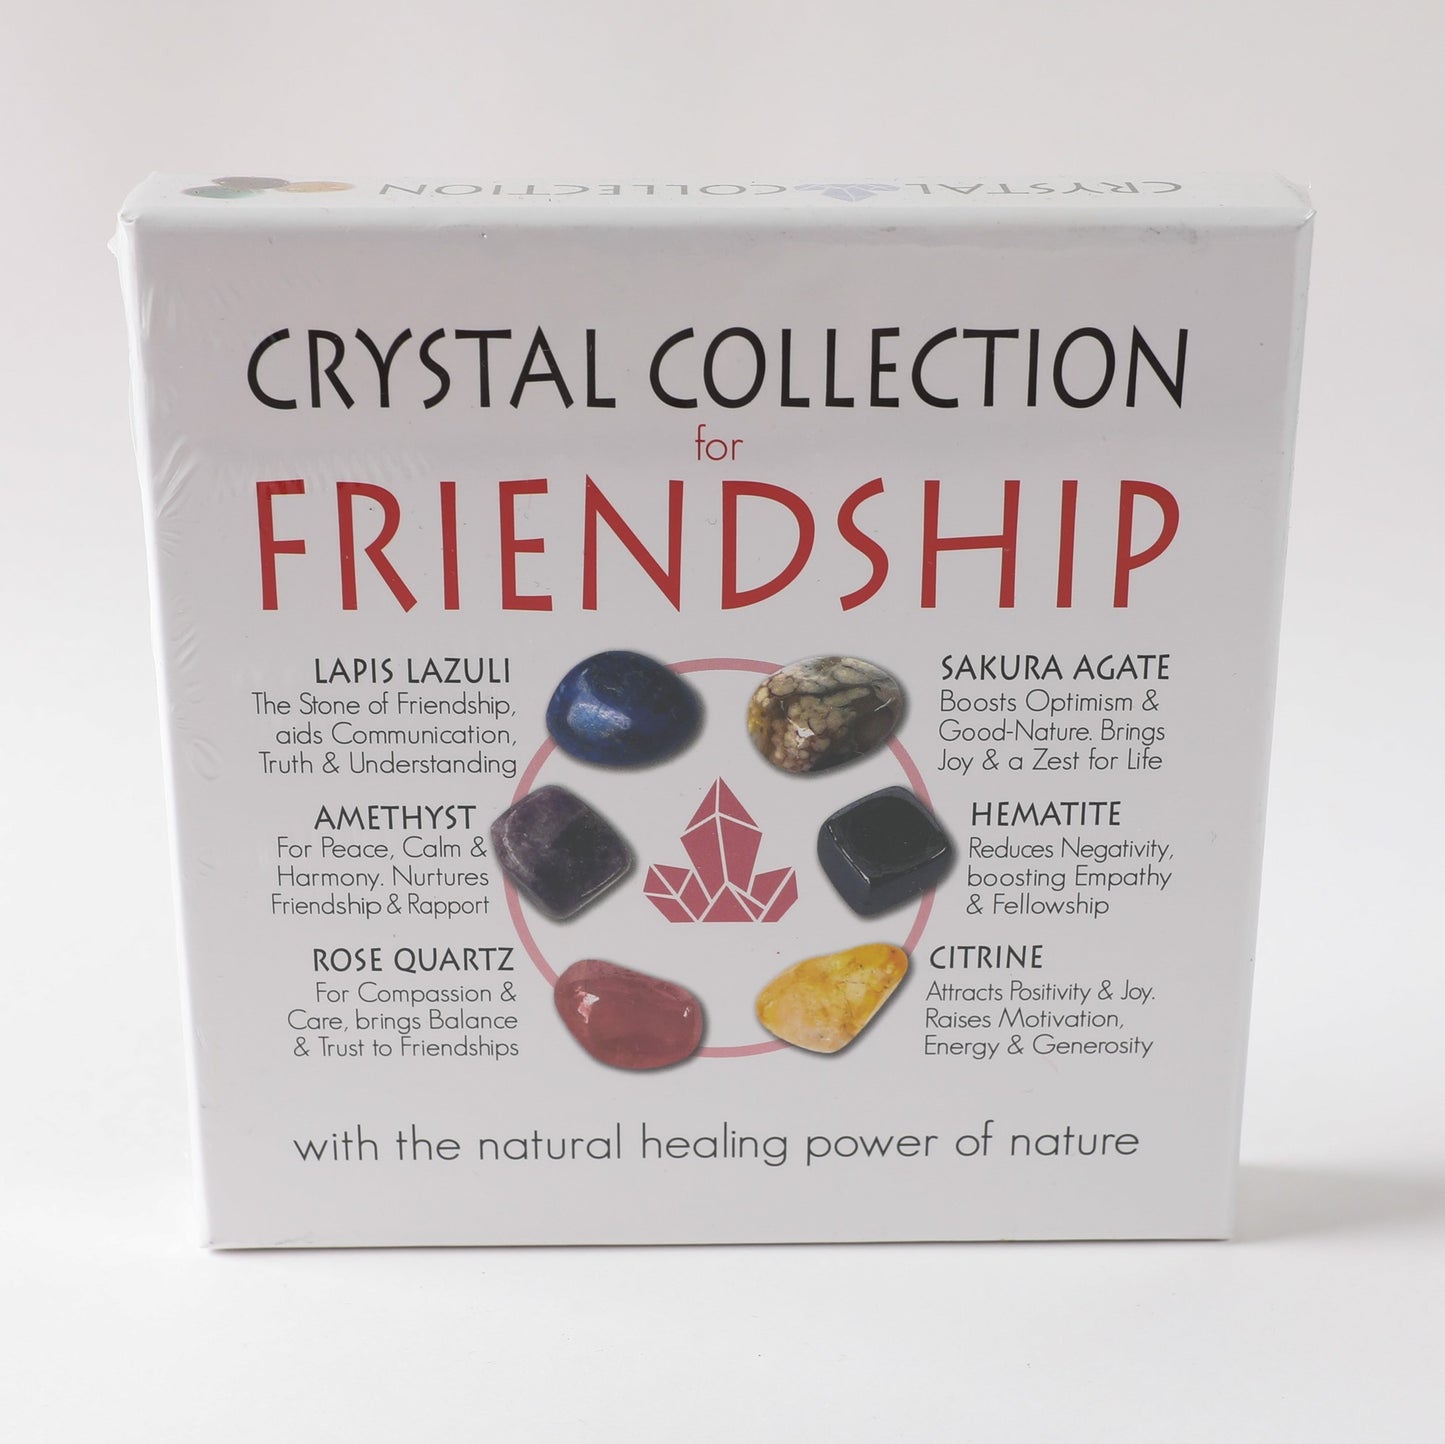 Crystal Collection Set - Friendship